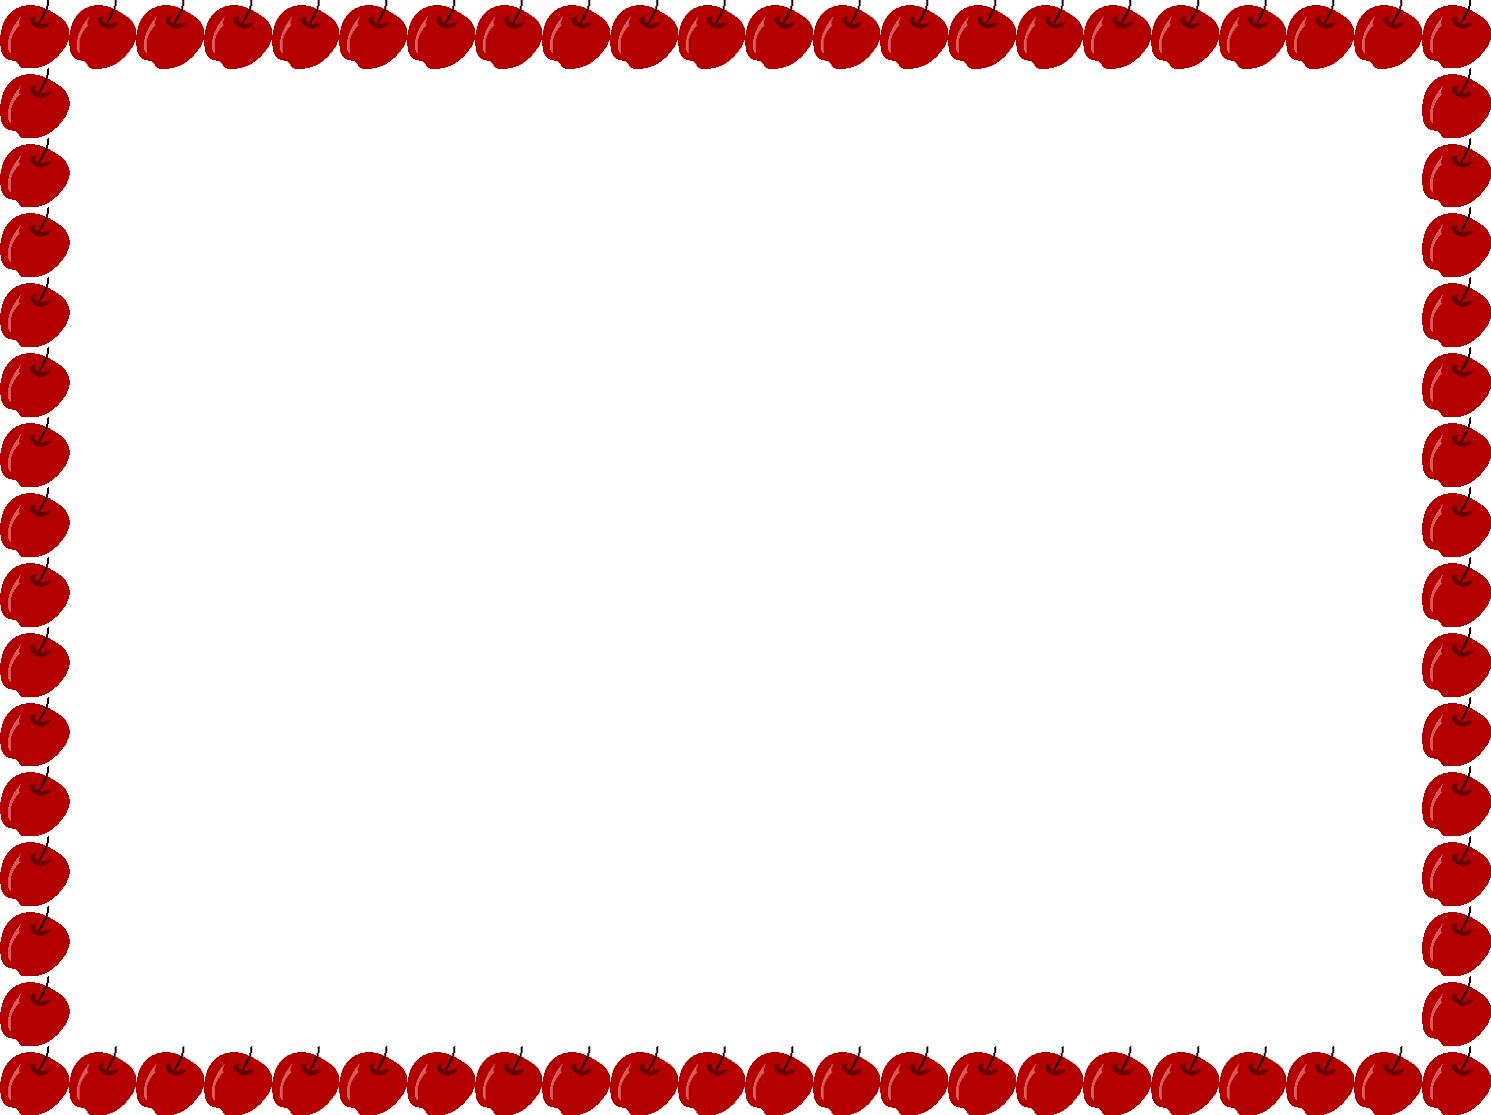 Red And Black Border Clip Art.